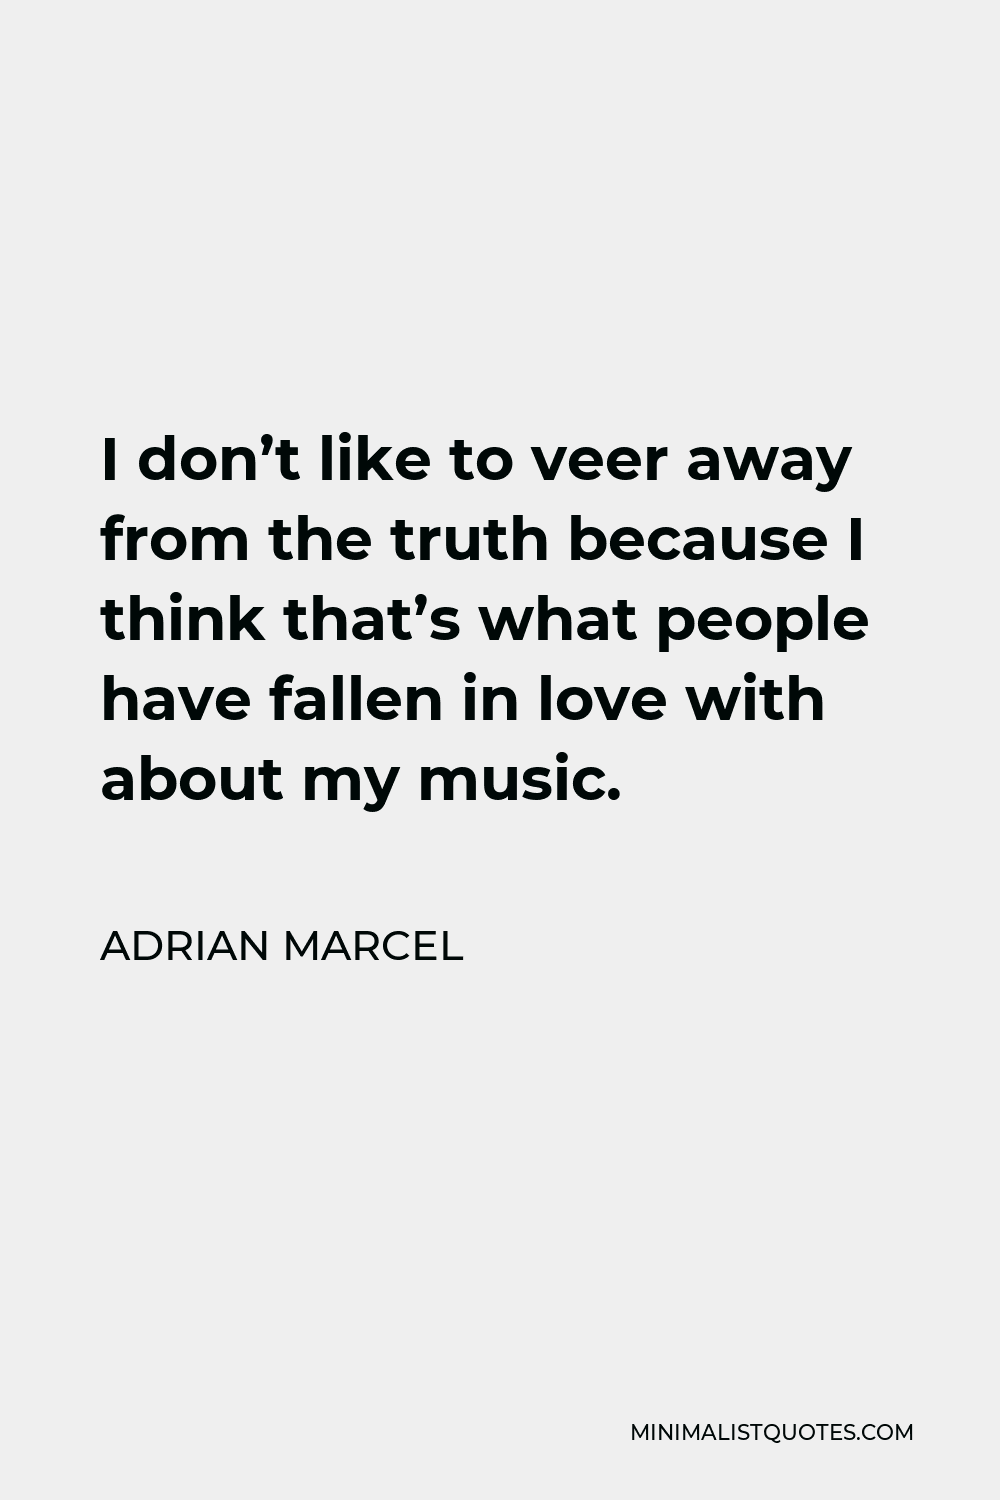 Adrian Marcel Quote - I don’t like to veer away from the truth because I think that’s what people have fallen in love with about my music.